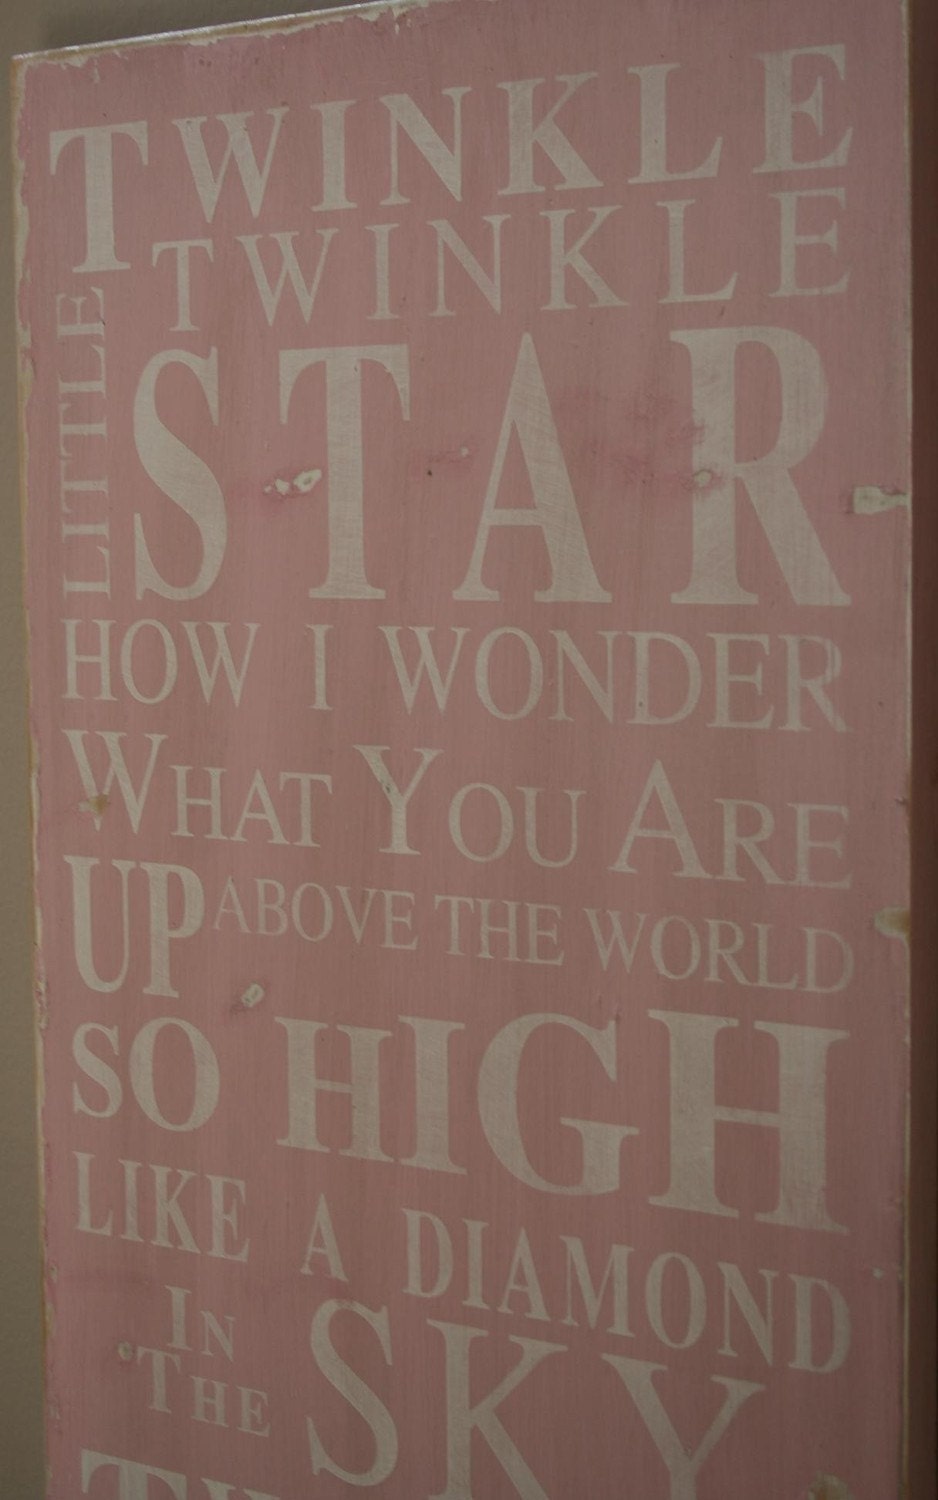 Twinkle Twinkle Little Star Typography Word Art Sign - The Perfect Sign for a Nursery